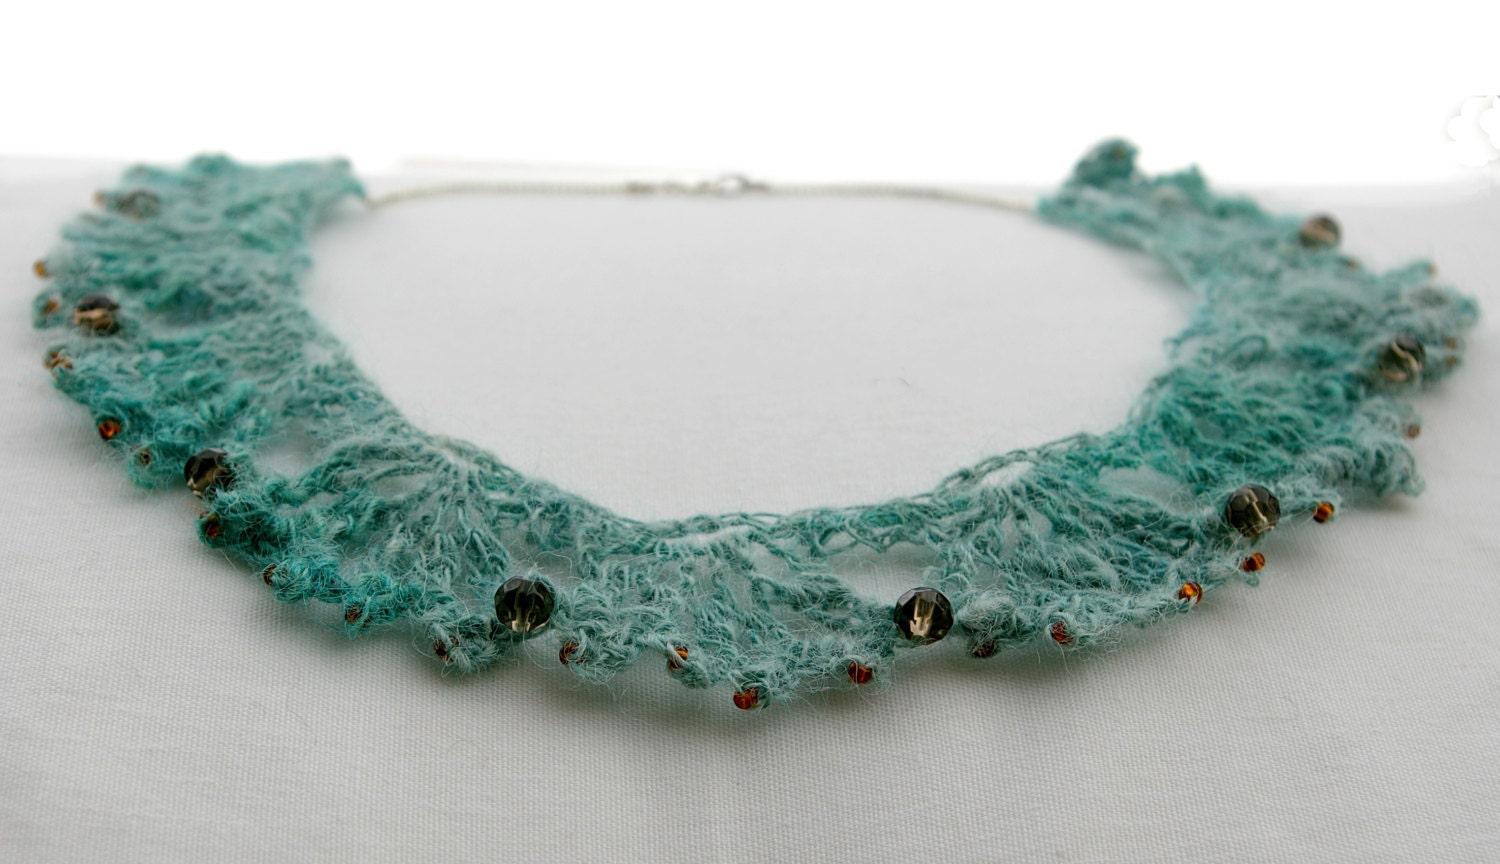 Crocheted necklace, turquoise lace whit glass beads